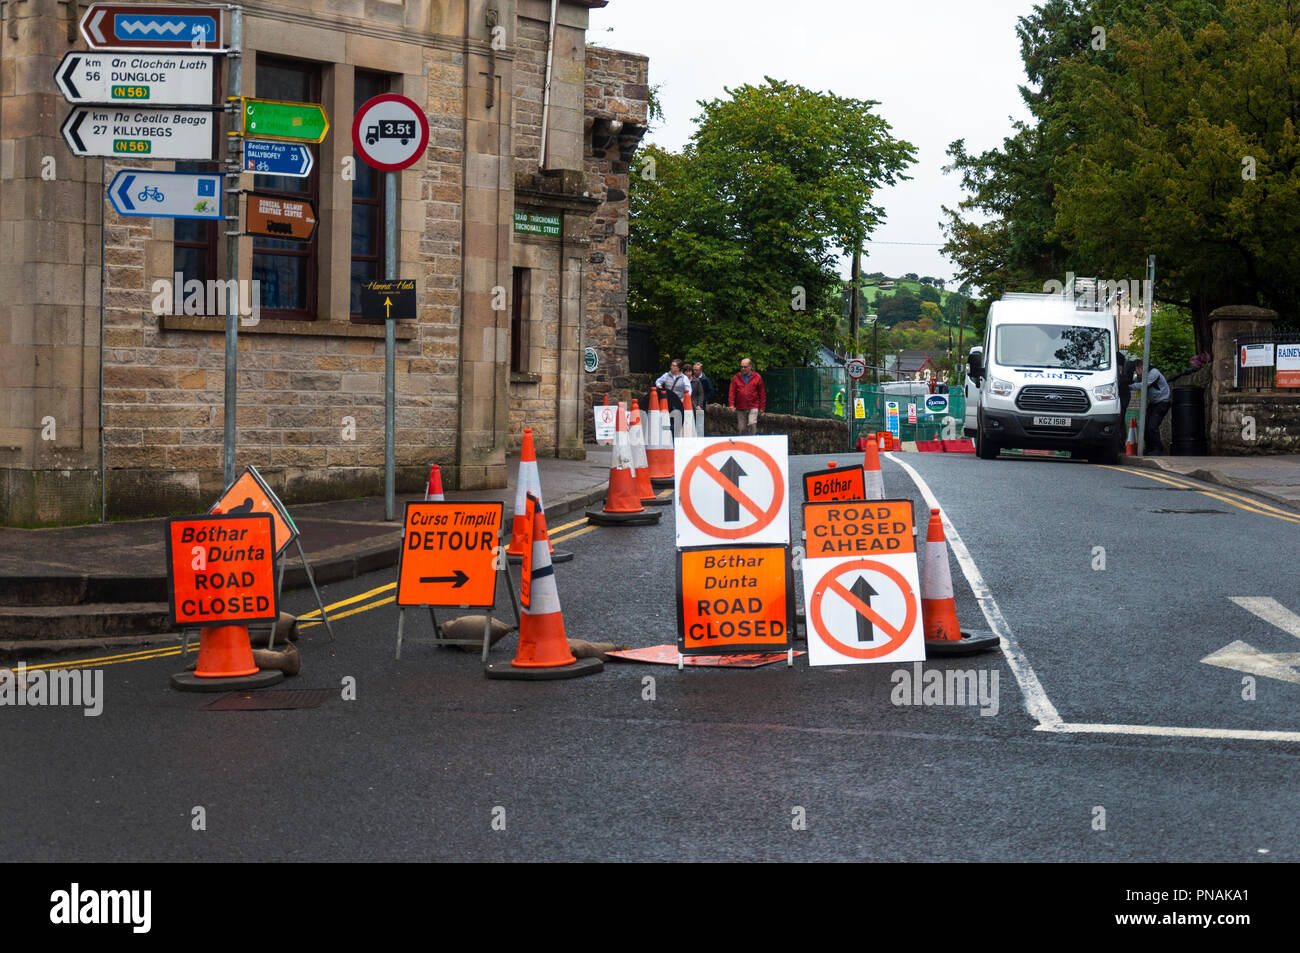 Road closed detour signs signage in Irish language Gaelic at Donegal Town, County Donegal, Ireland Stock Photo